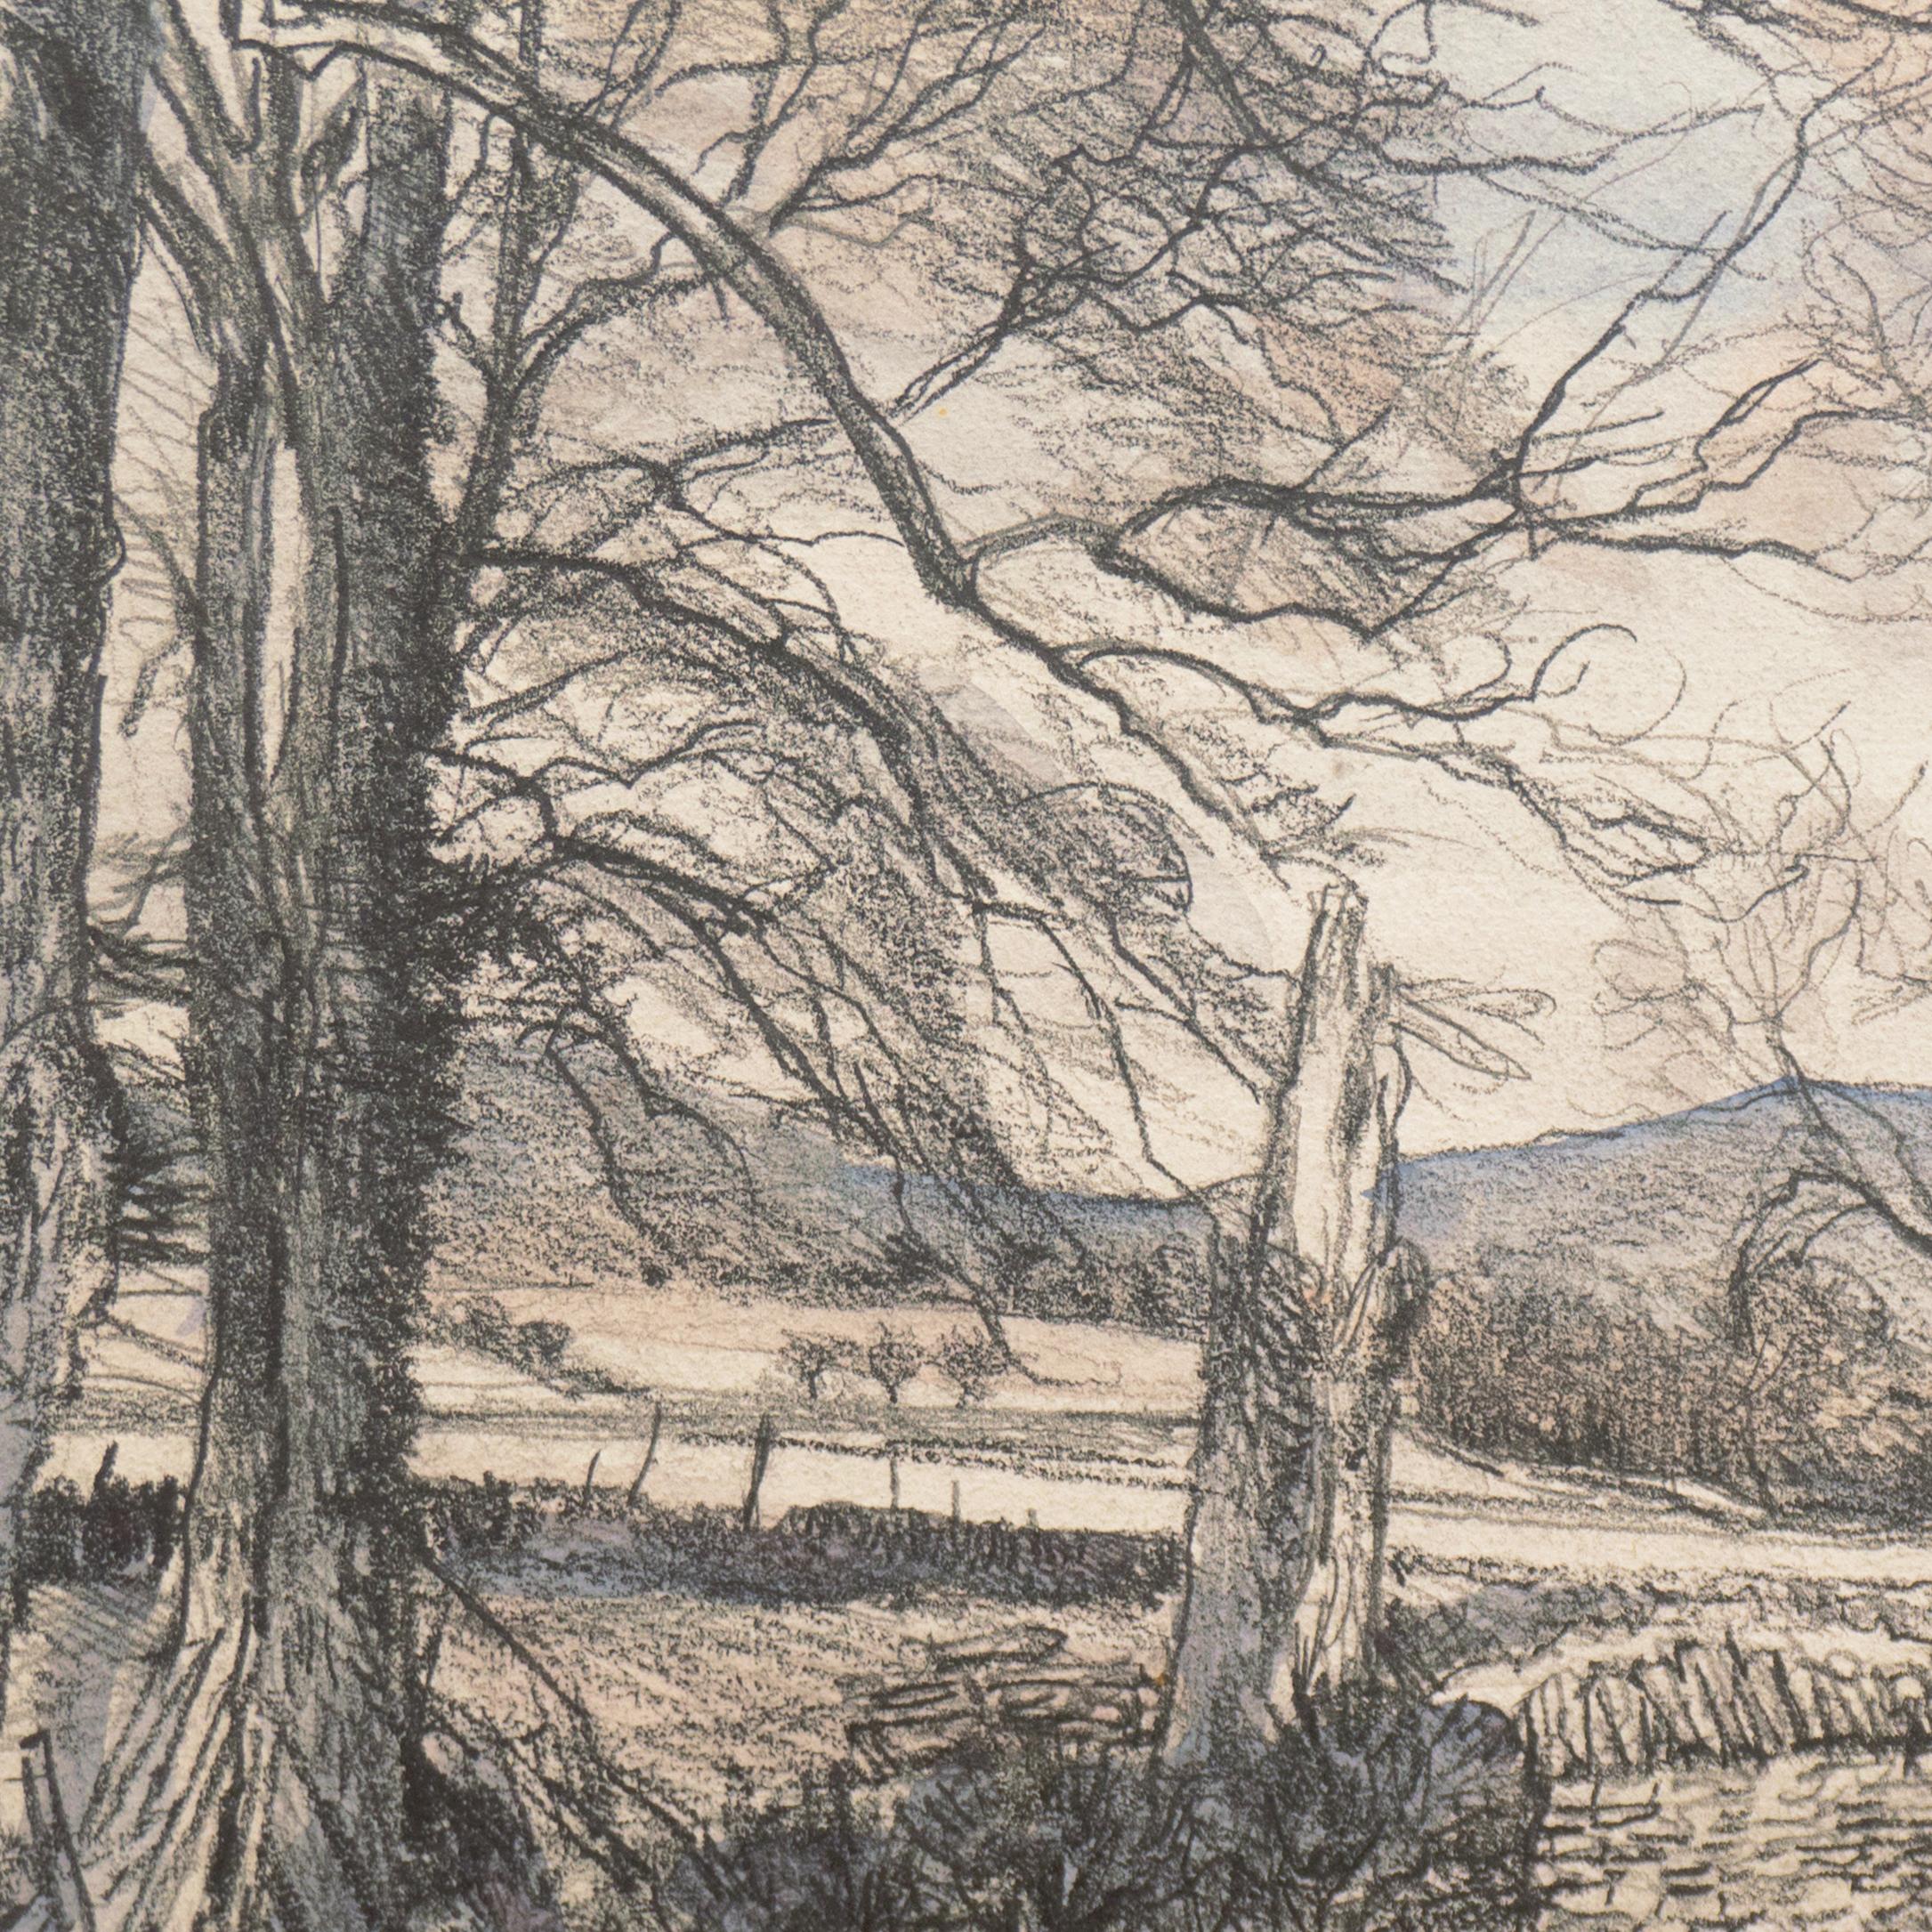 'Windy Day Fallows, Angus', Dundee, Scotland, Royal Society of Arts, Paris - Brown Landscape Art by James McIntosh Patrick